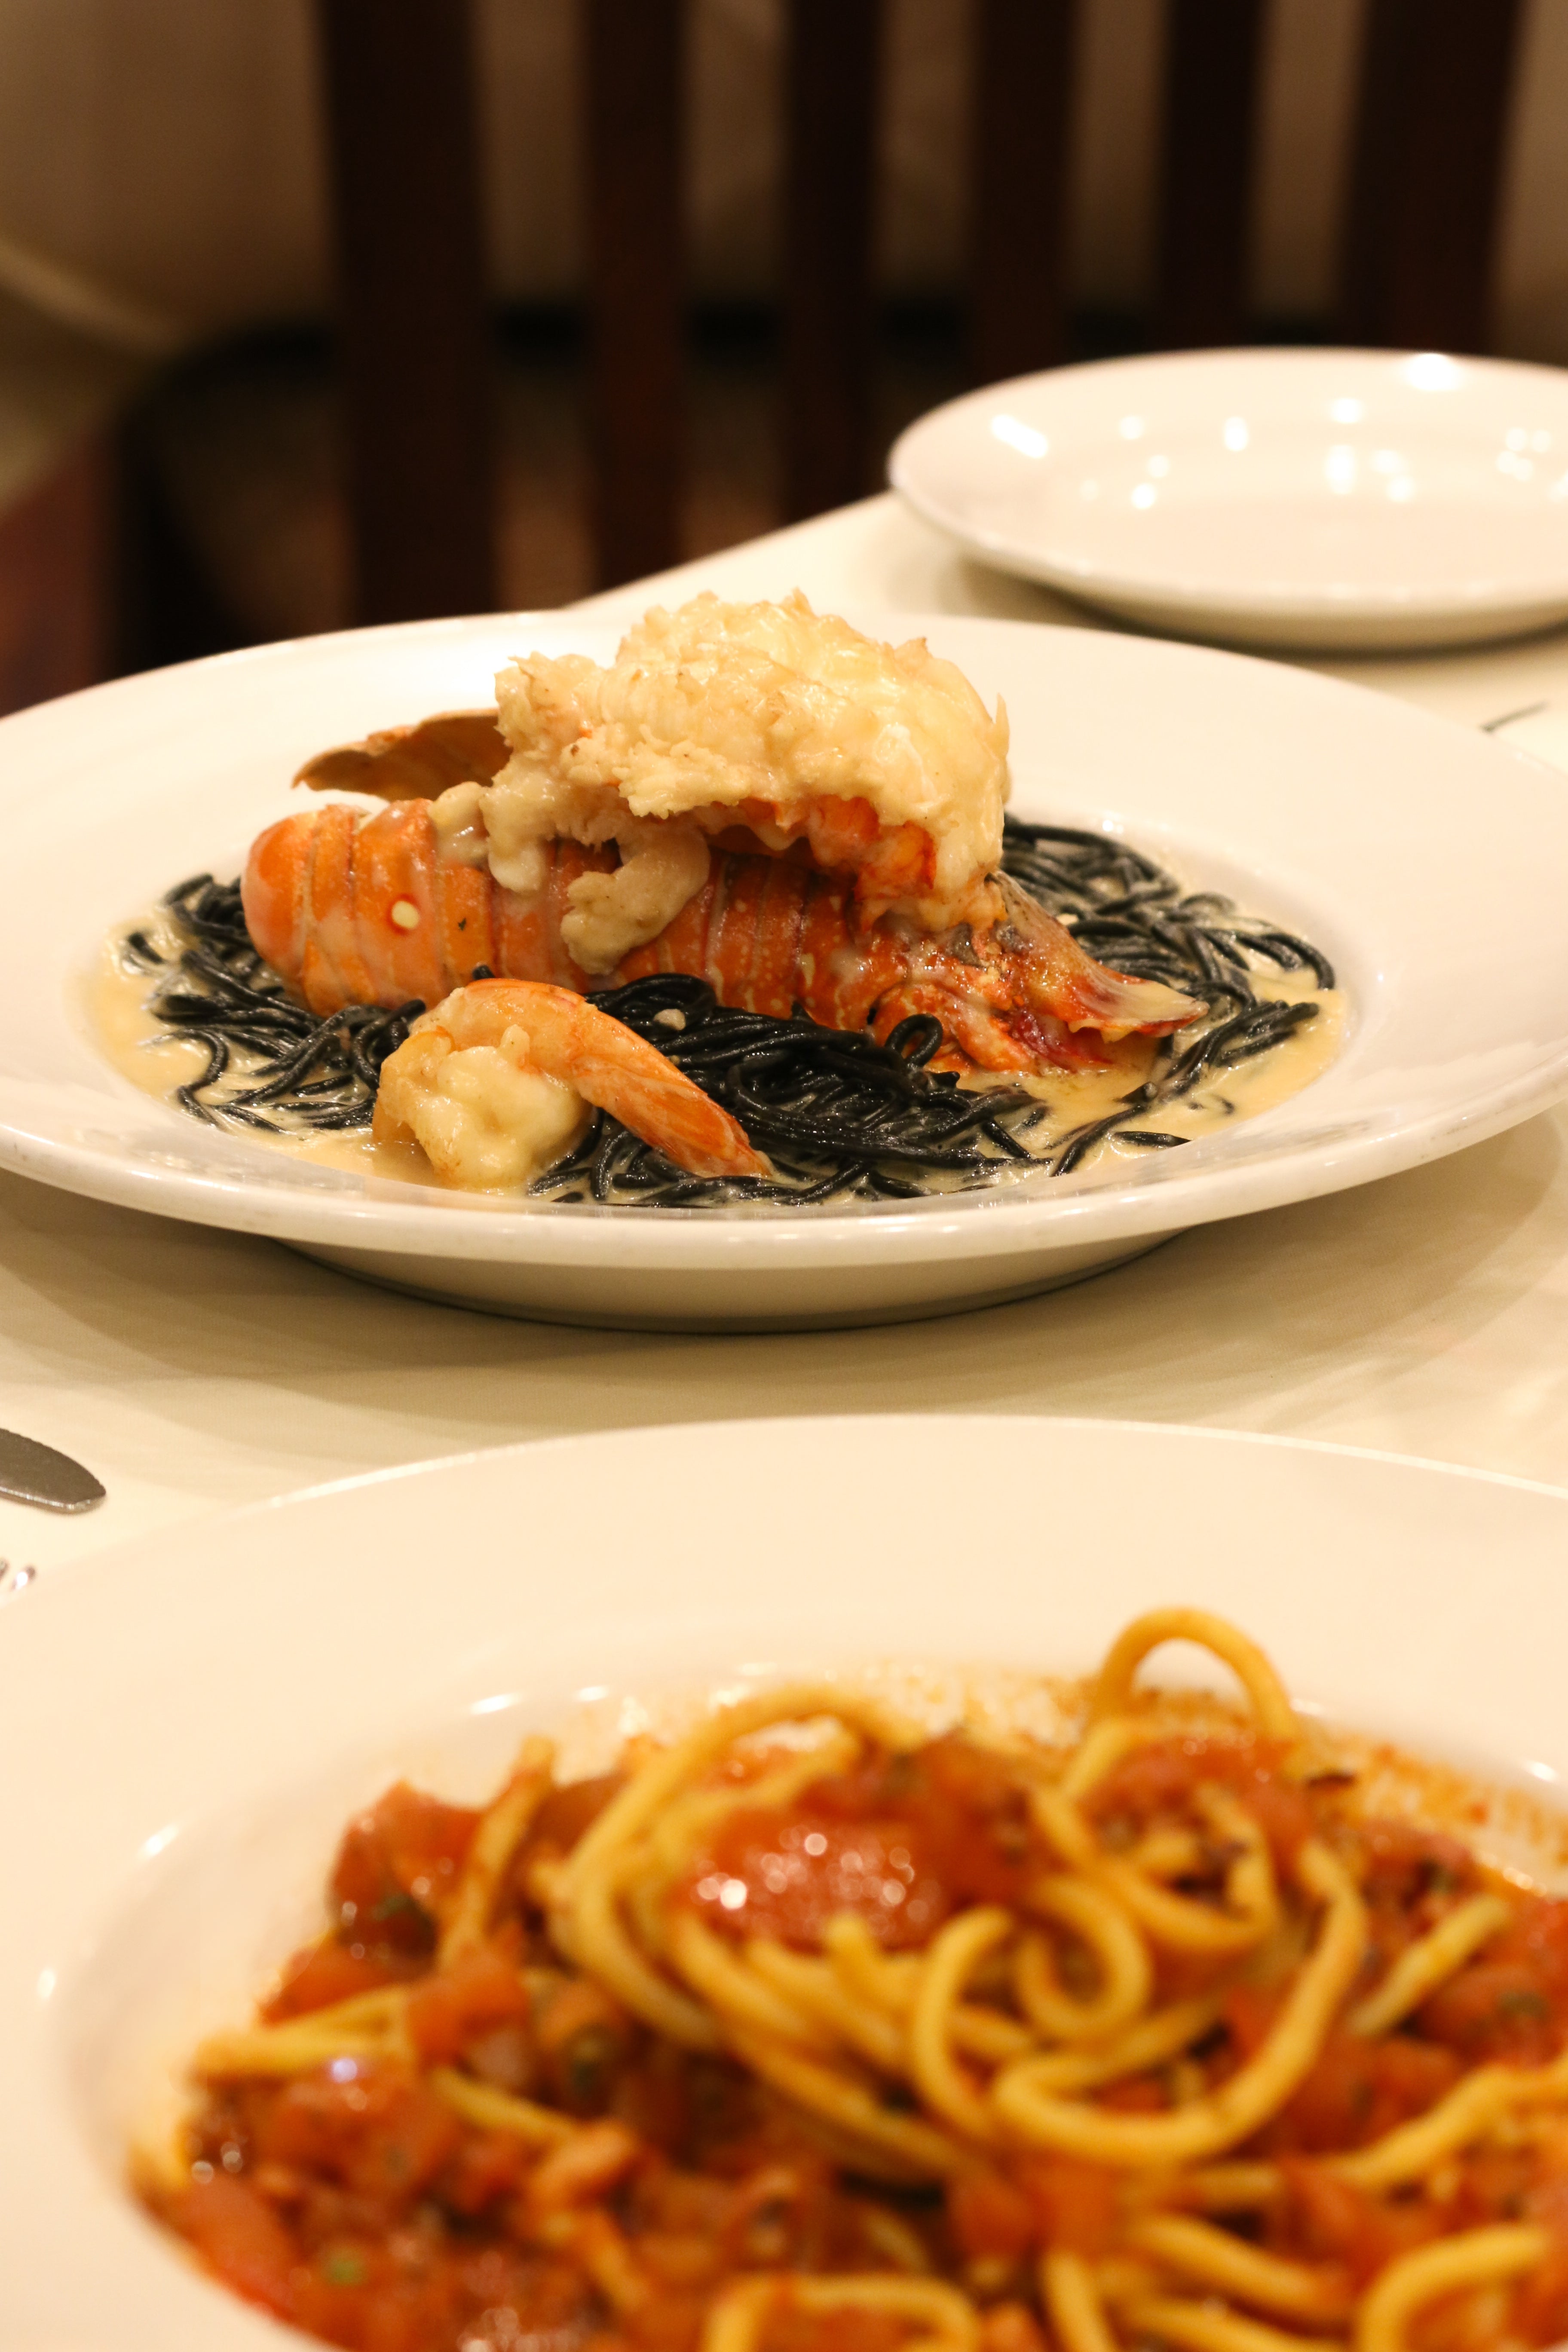 A photo of two plates of pasta from Anacapri Italian restaurant. The first plate features lobster and squid ink noodles, while the second plate contains bucatini pasta with red sauce.